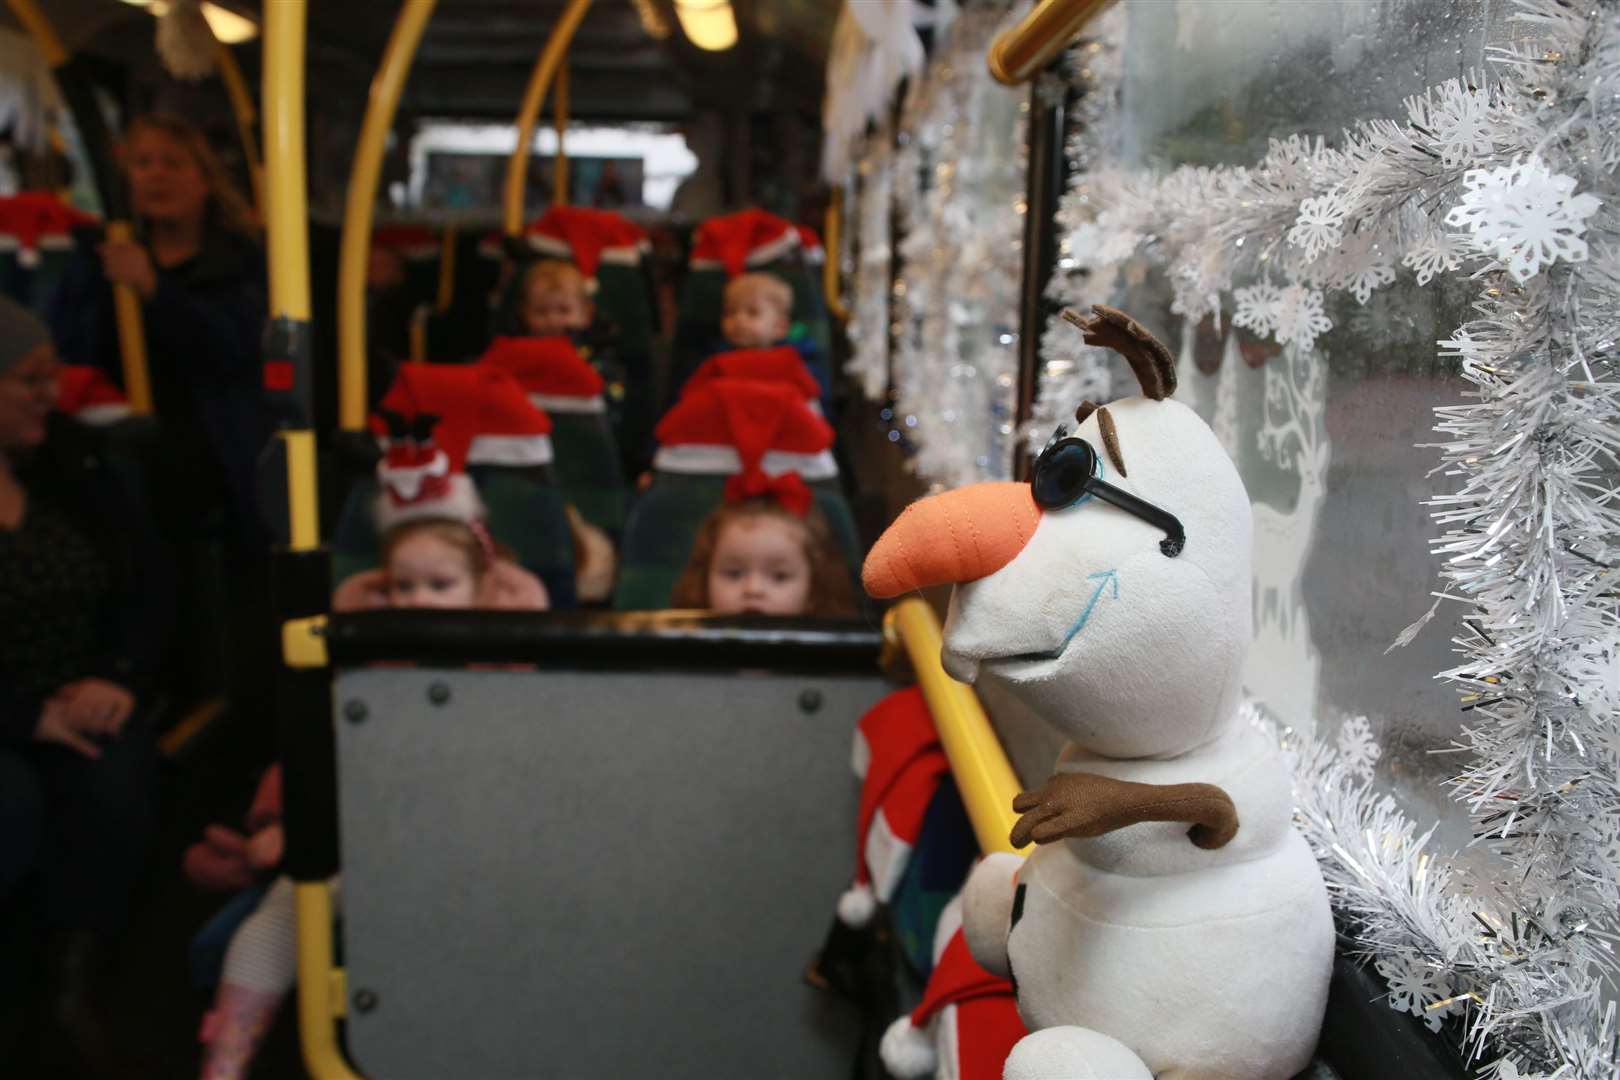 Olaf the snowman said hello to passengers as they got on. Picture: Phil Lee